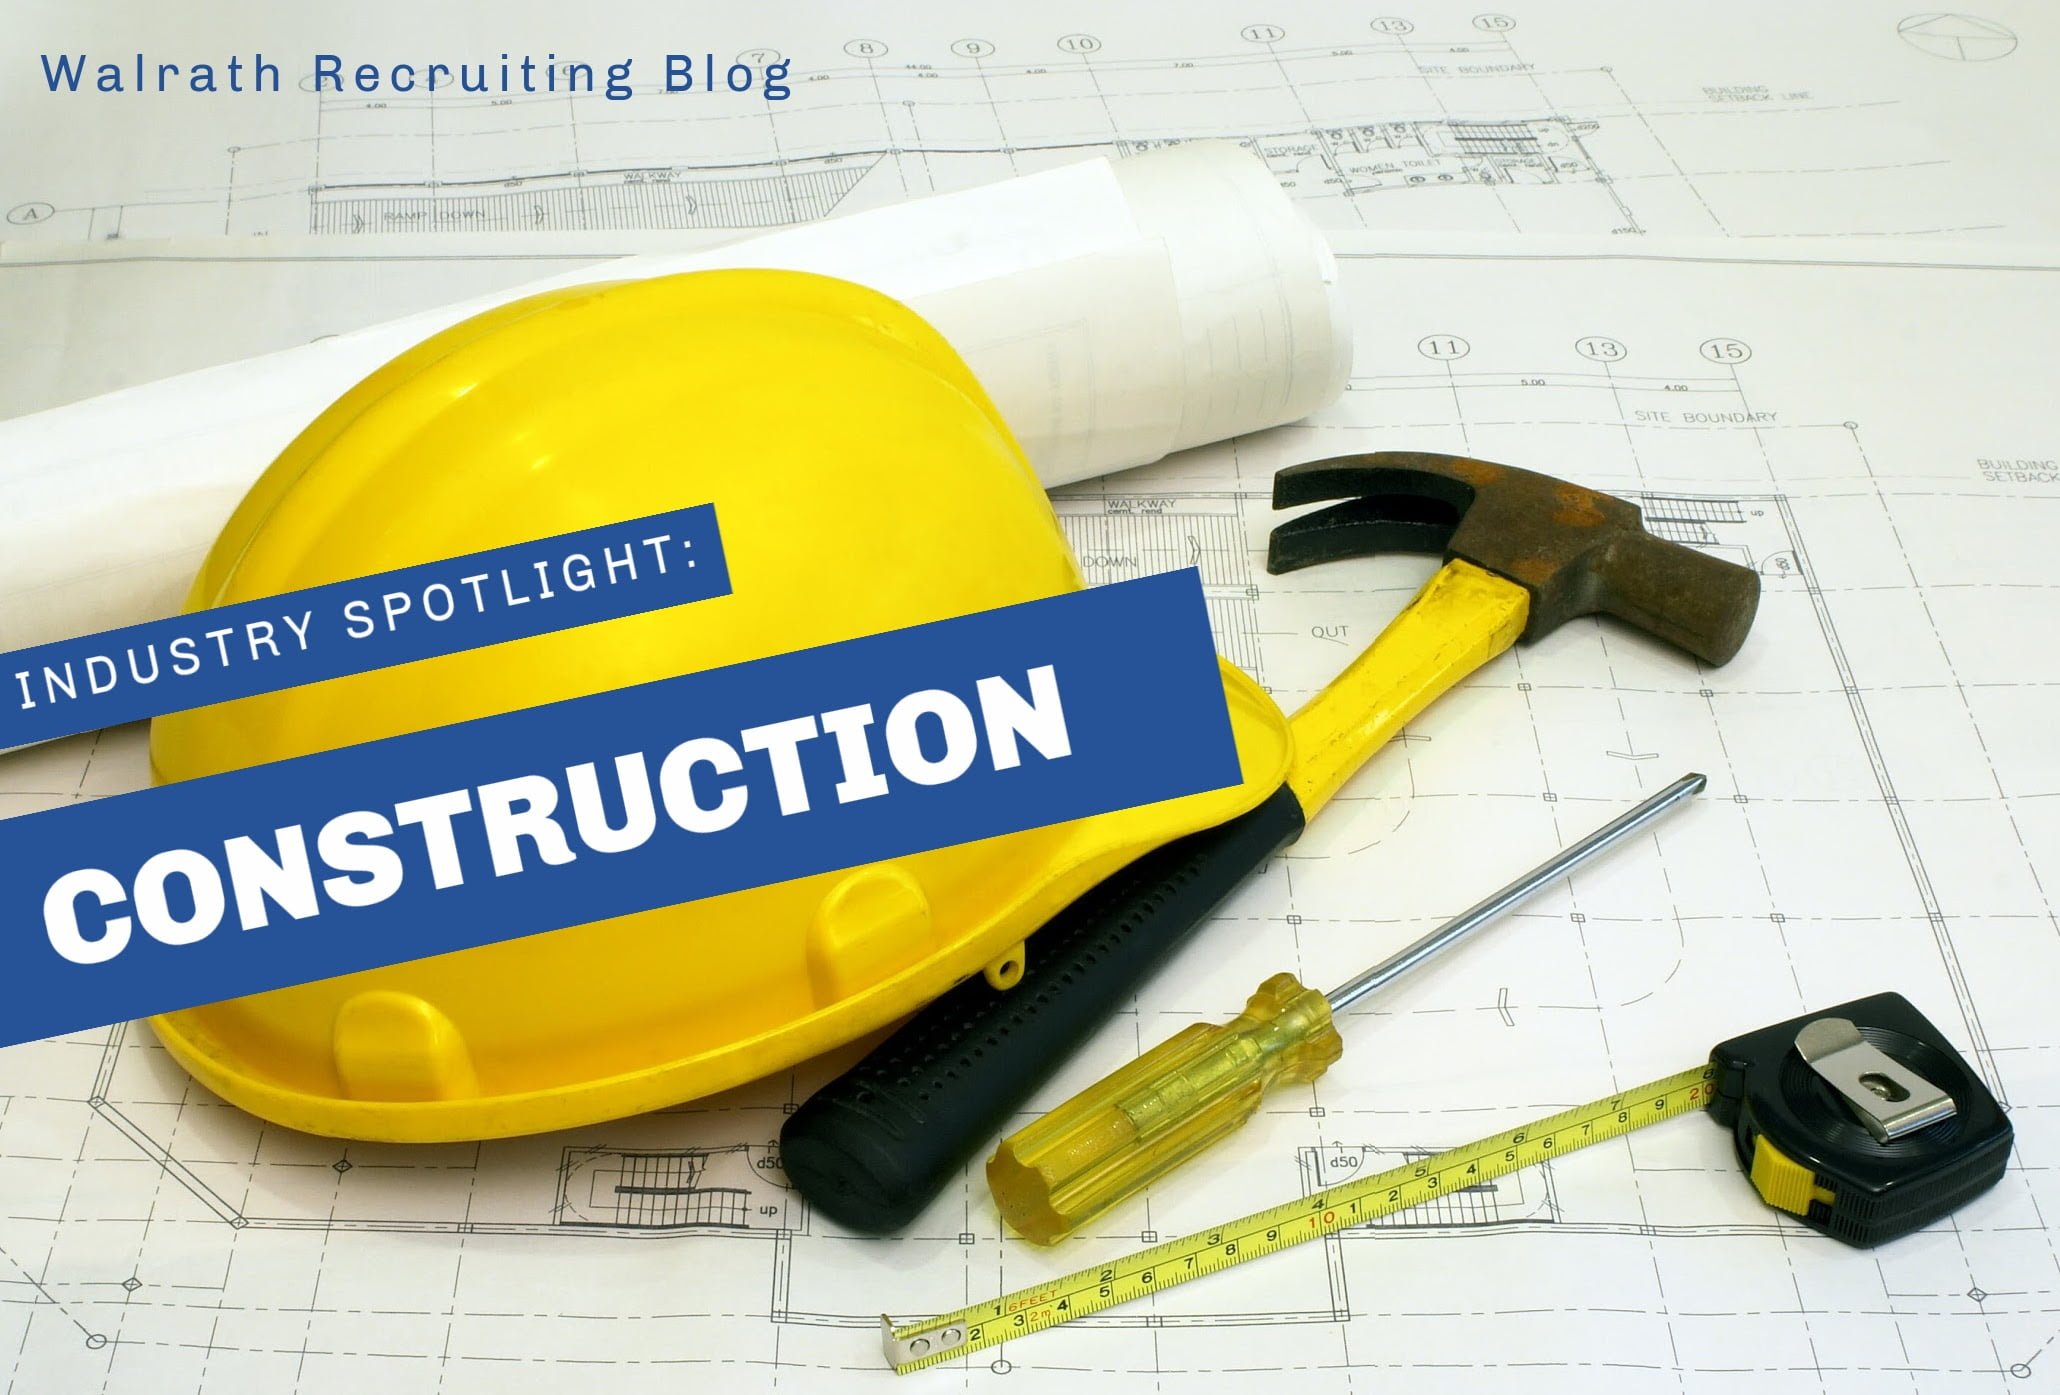 Check out this month's Industry Spotlight, Construction